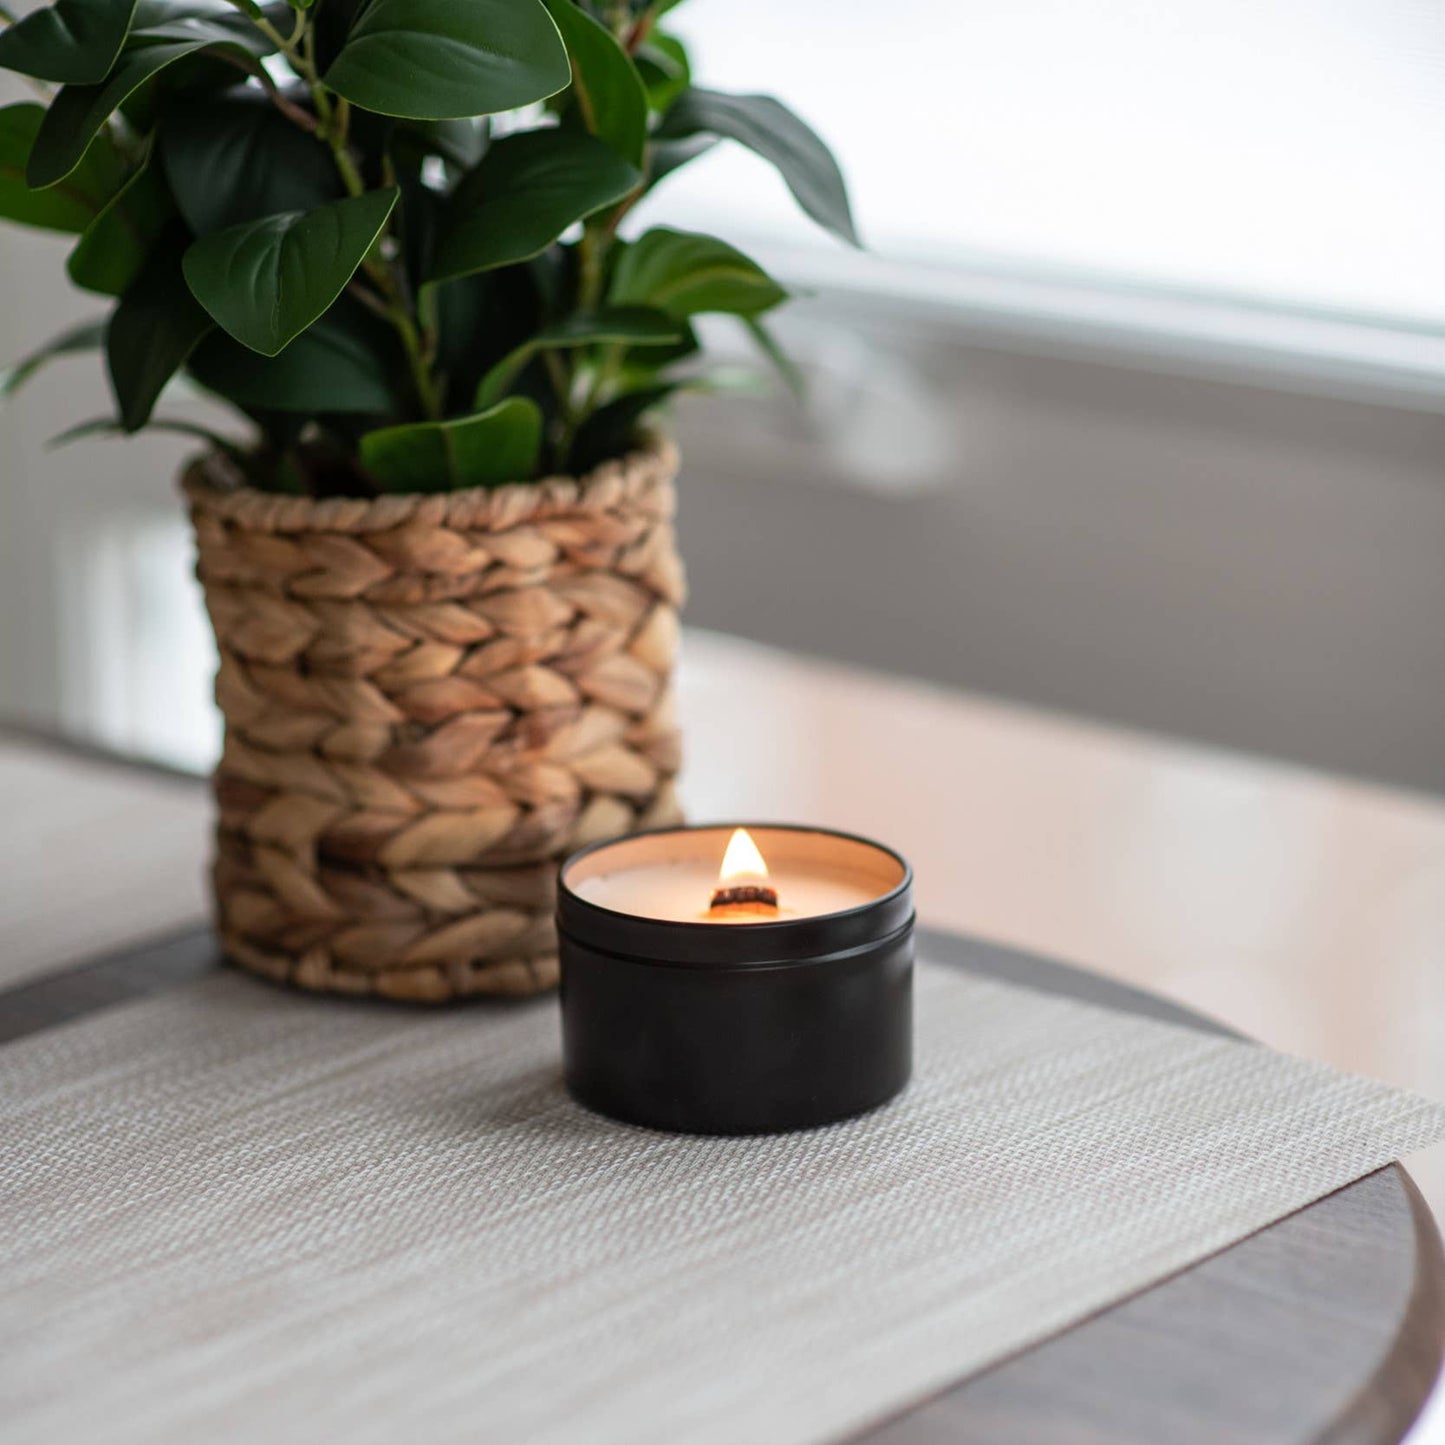 Anchored Northwest - Sea Salt & Orchid Wood Wick Black Soy Candle: 6oz